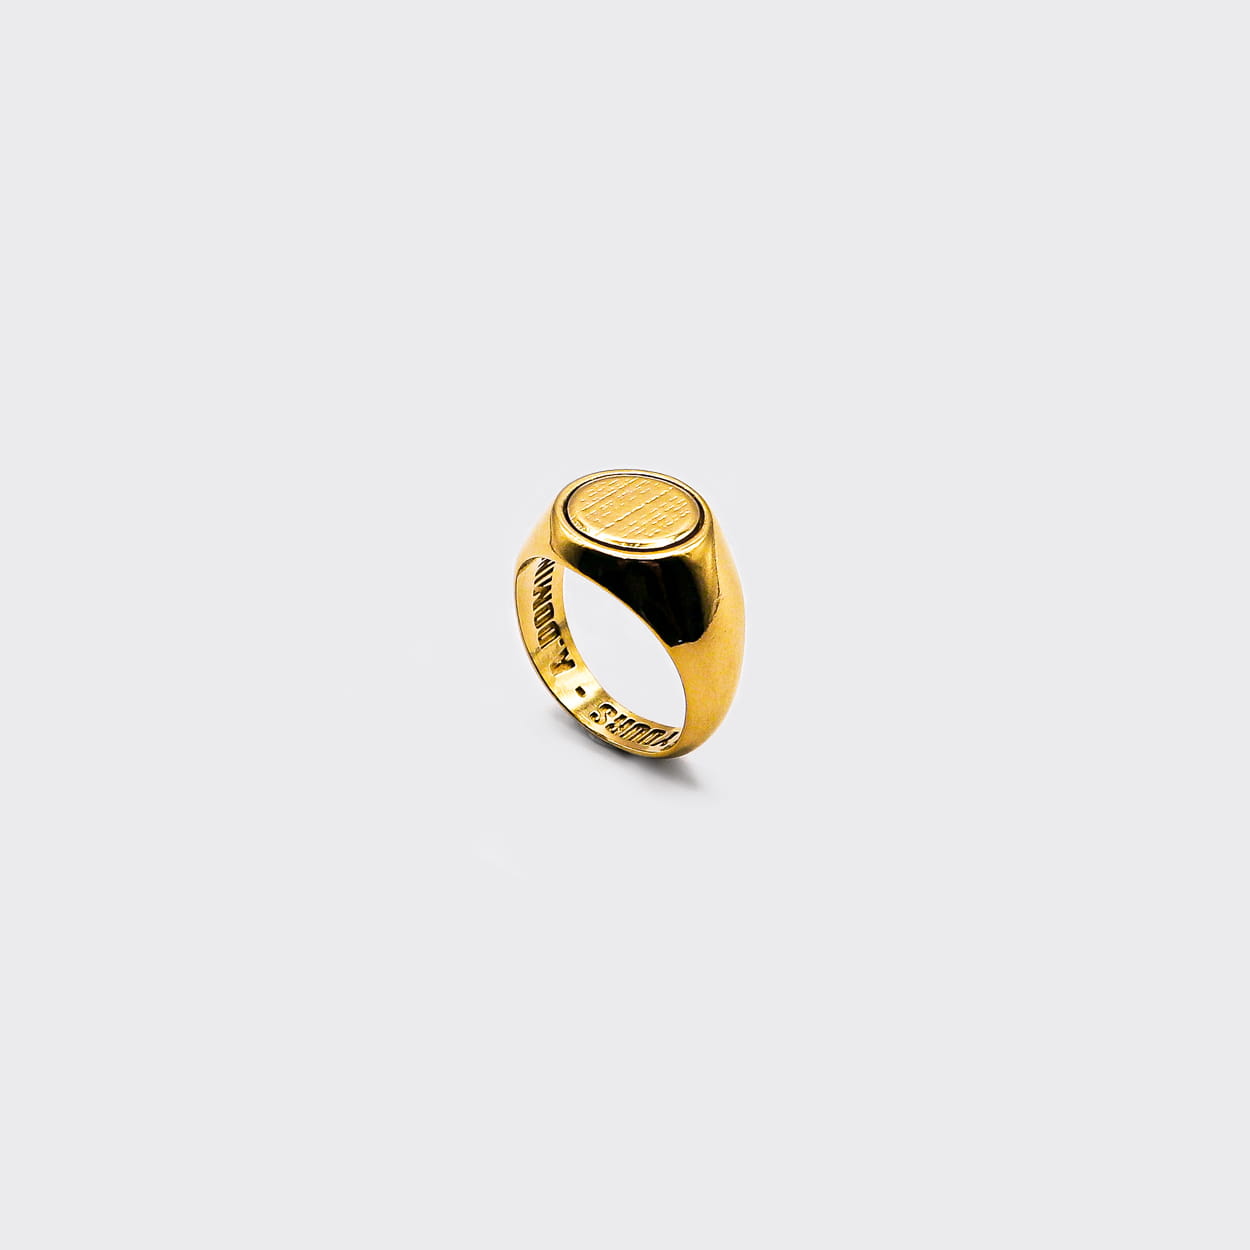 Atelier Domingo's Original gold ring is made in Spain. This unisex ring is for both men and women. This jewelry is made of a high-quality 24 karat gold plating. A timeless ring for both men and women.